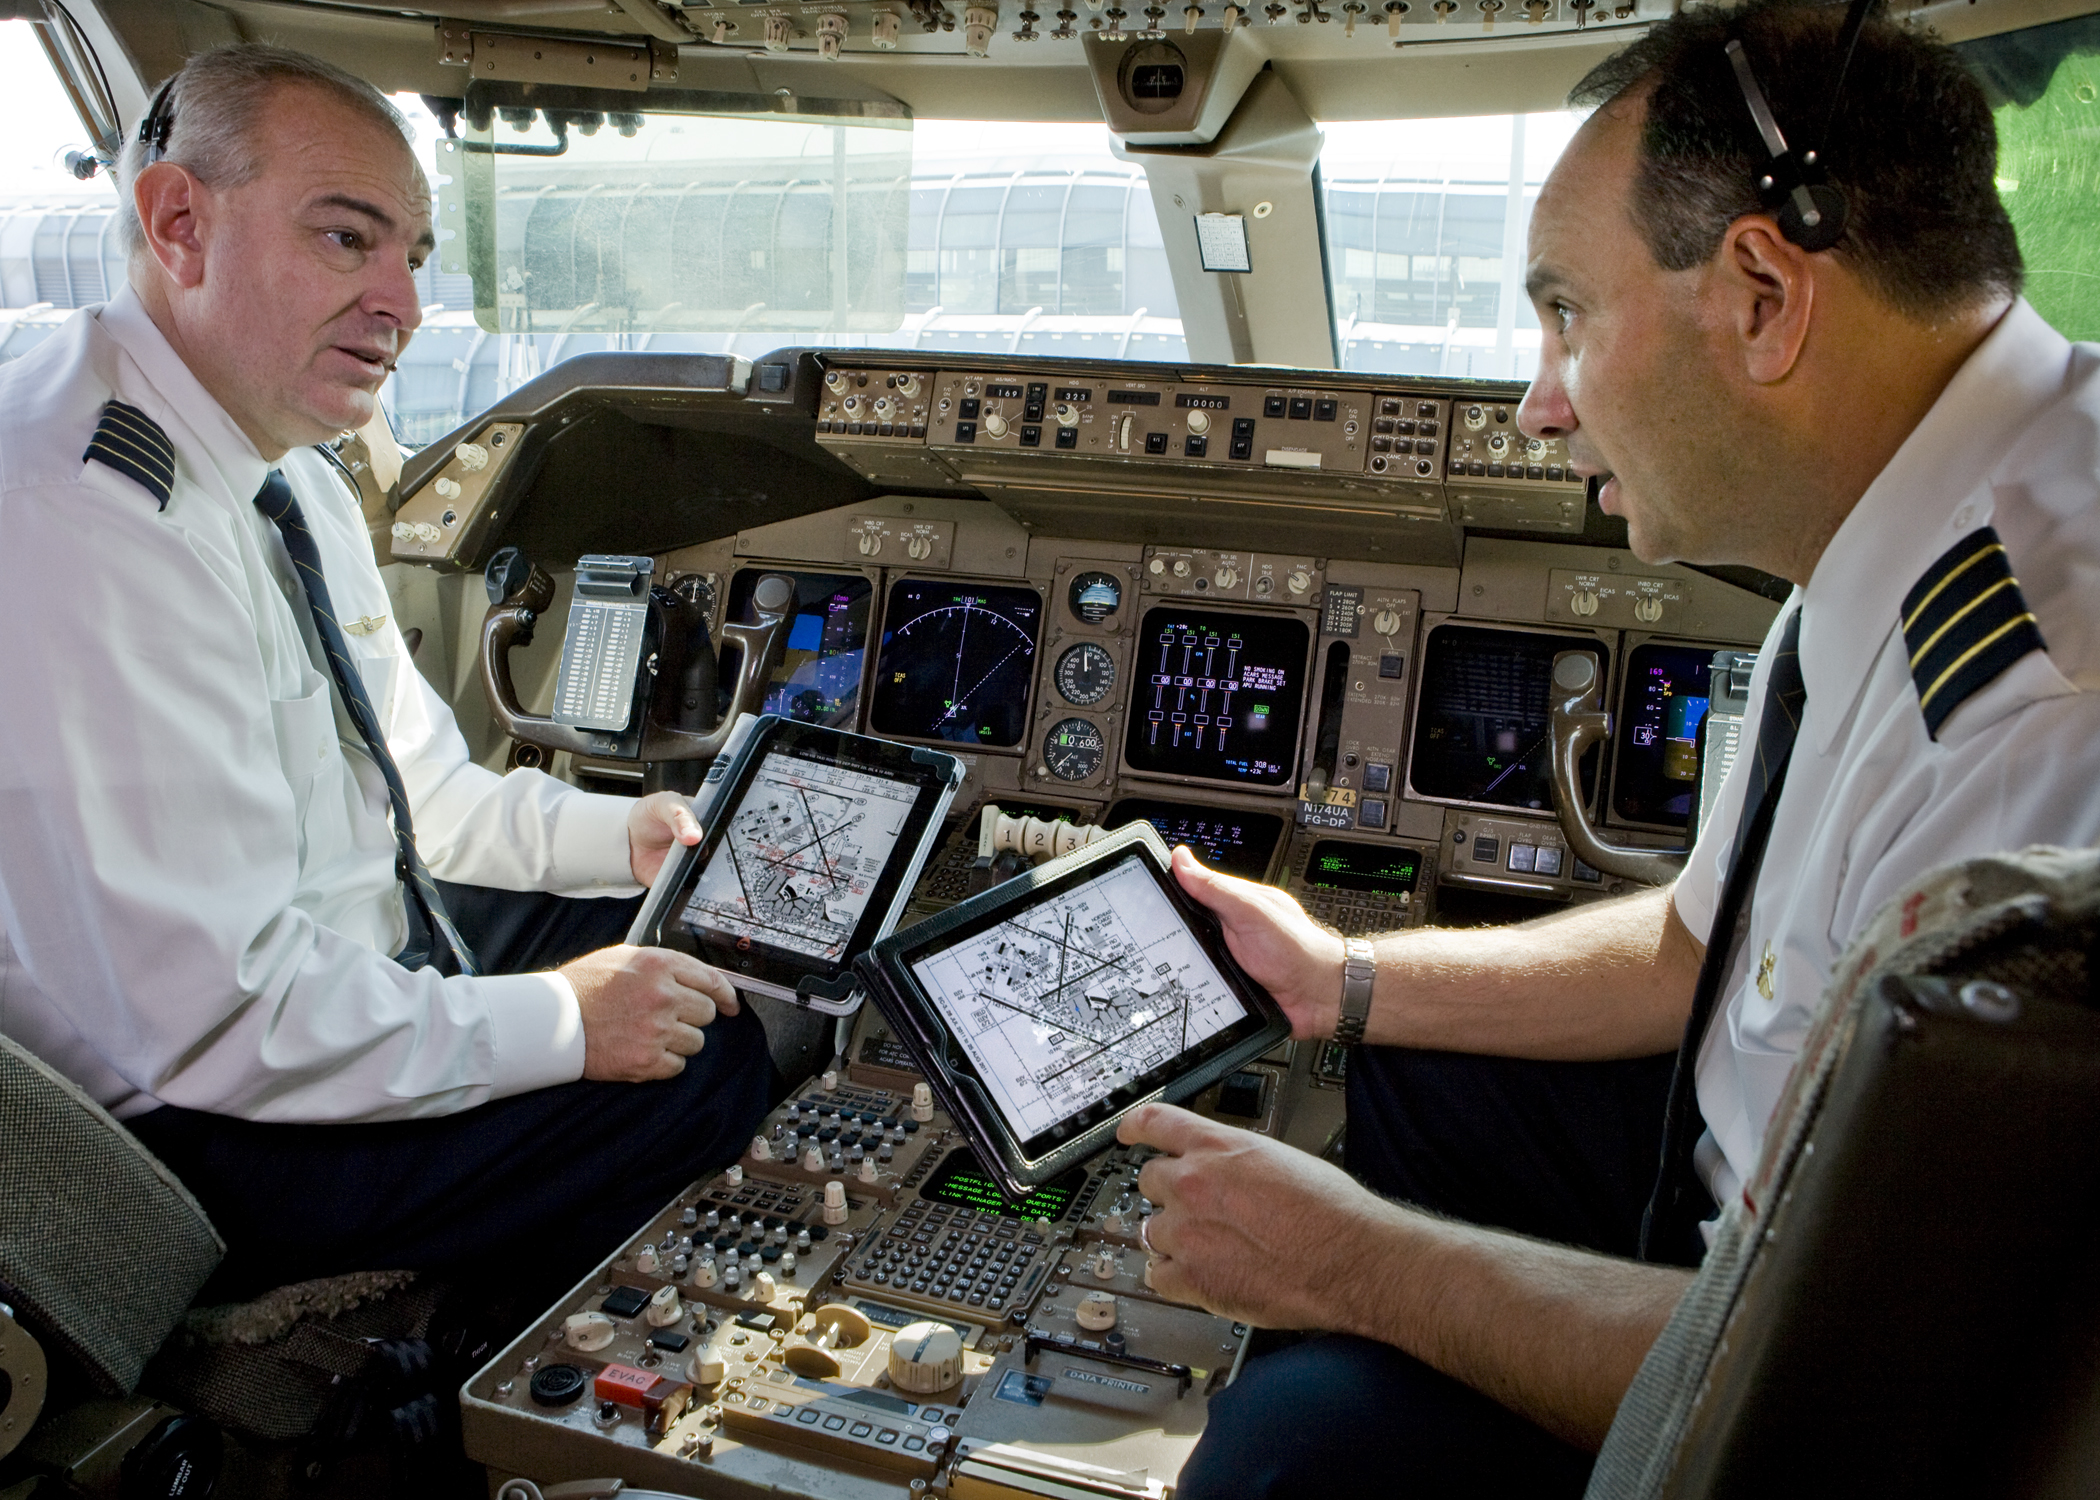 The Air Force is Buying iPads To Replace Pilots’ Books and Maps